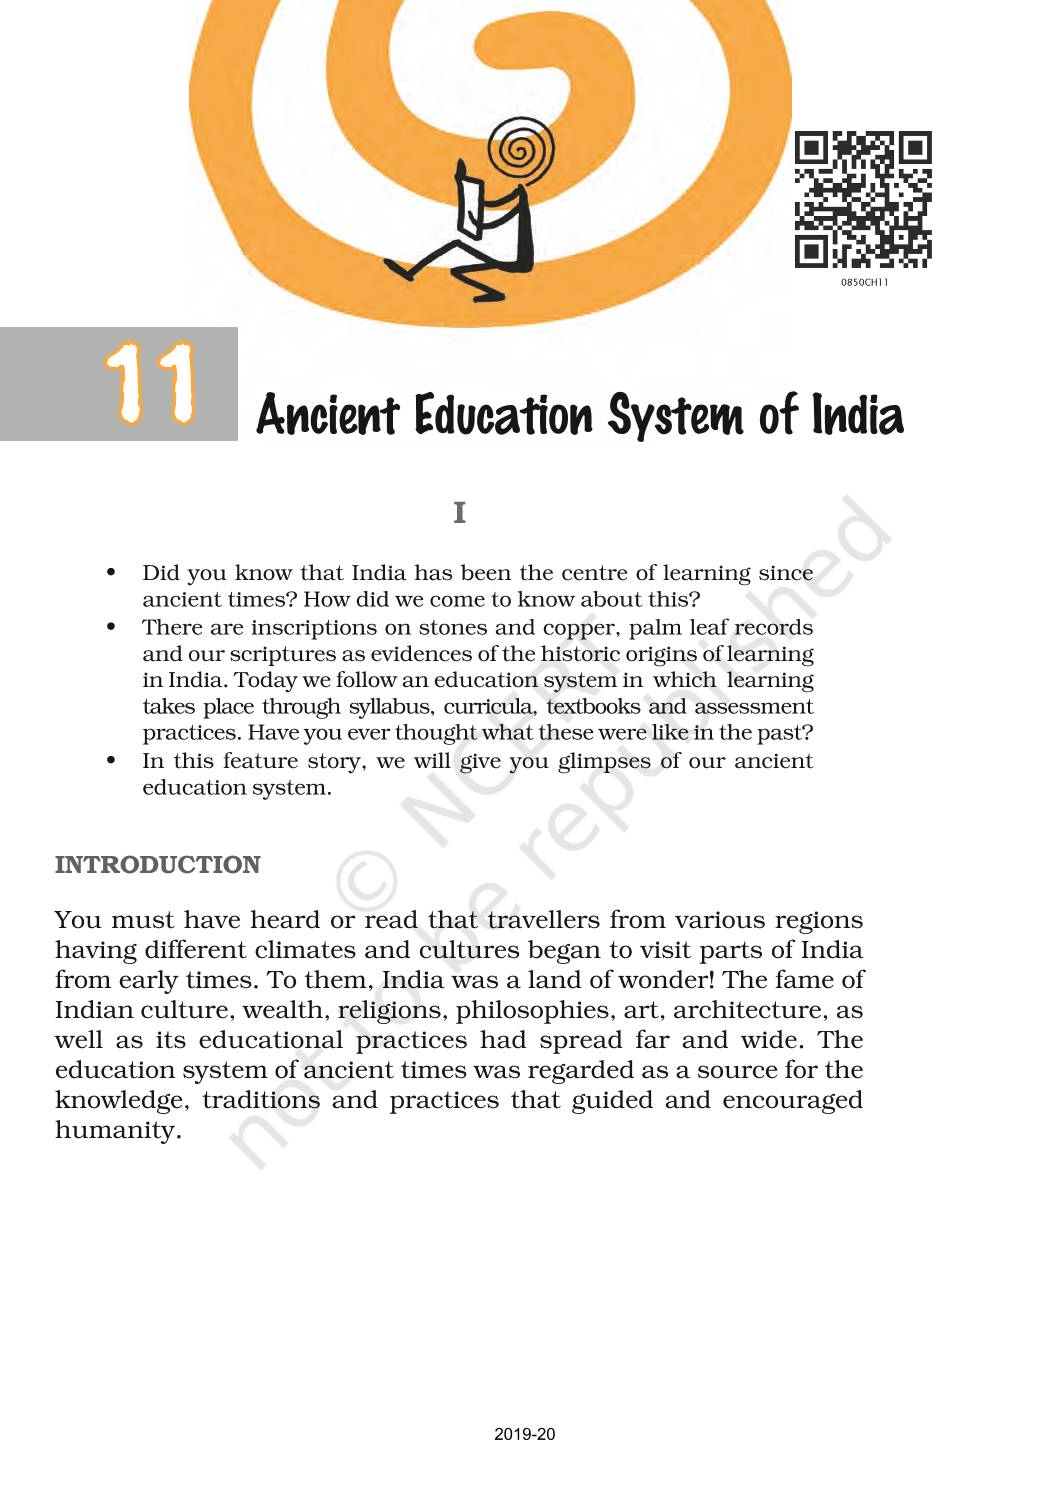 ancient education system of india essay